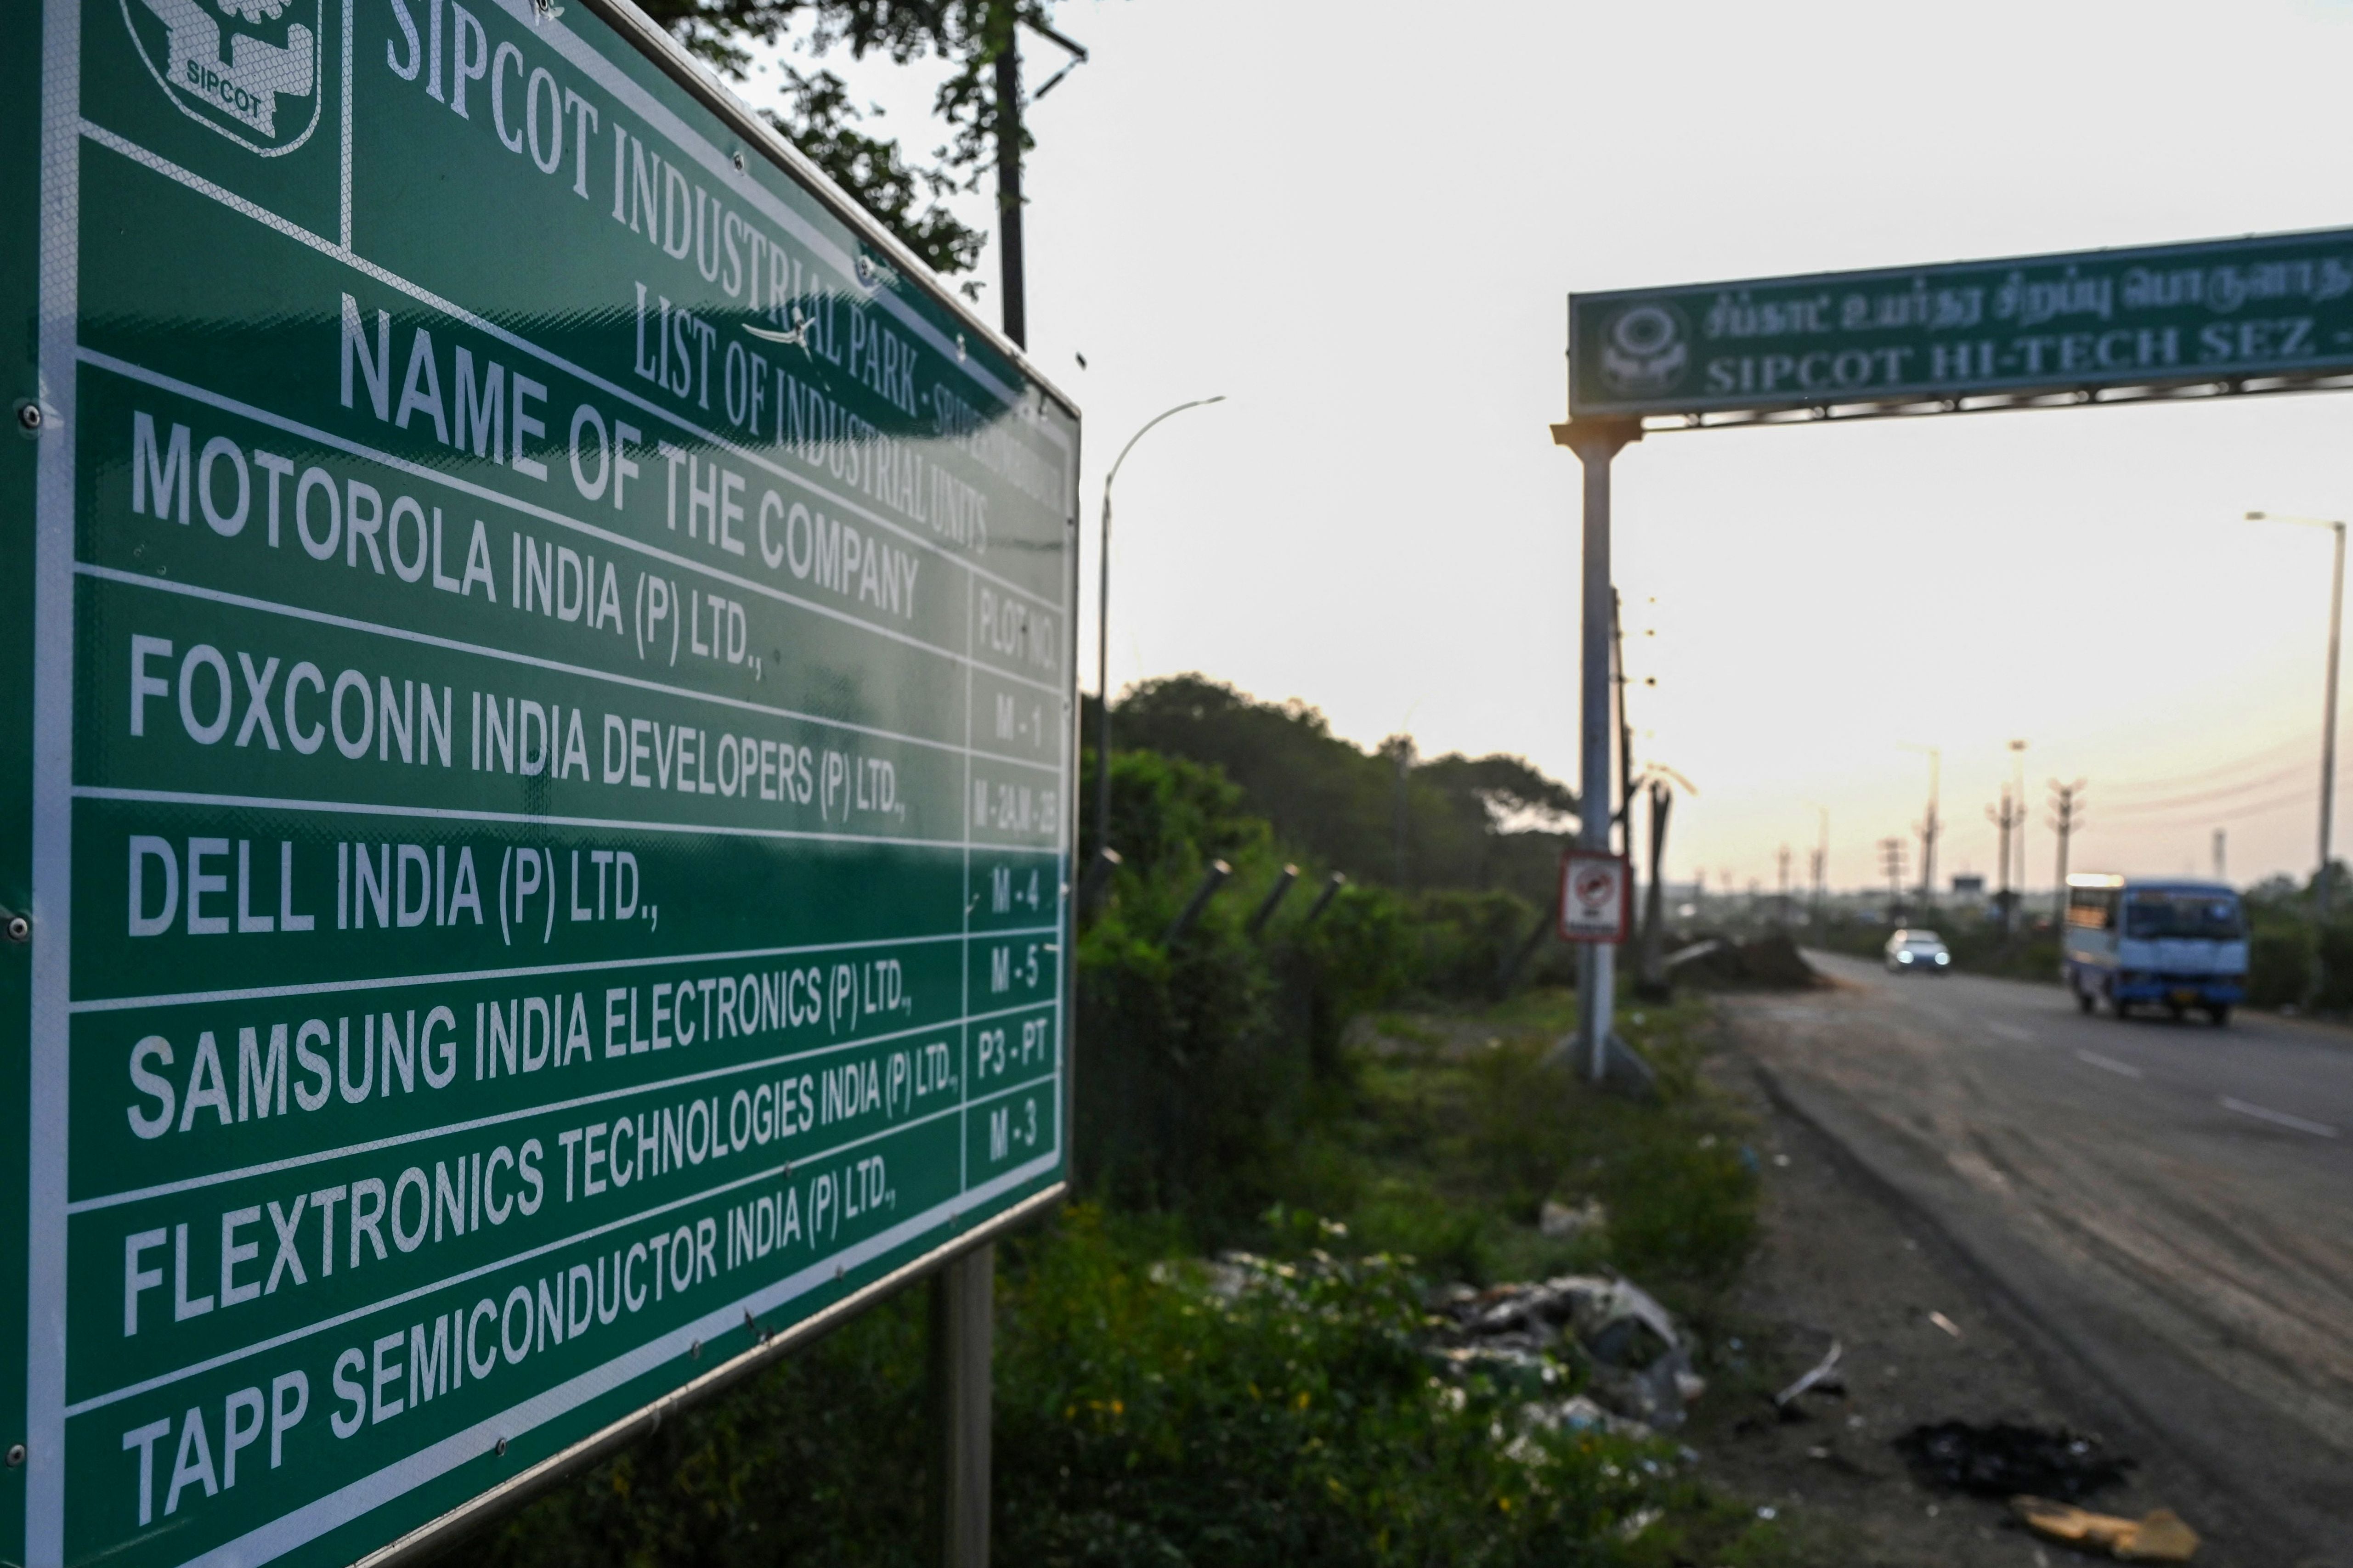 A signboard mentions the plot number of Foxconn India production unit at SIPCOT (State Industries Promotion Corporation of Tamil Nadu) a special economic zone (SEZ) in Sriperumbudur on the outskirts of Chennai